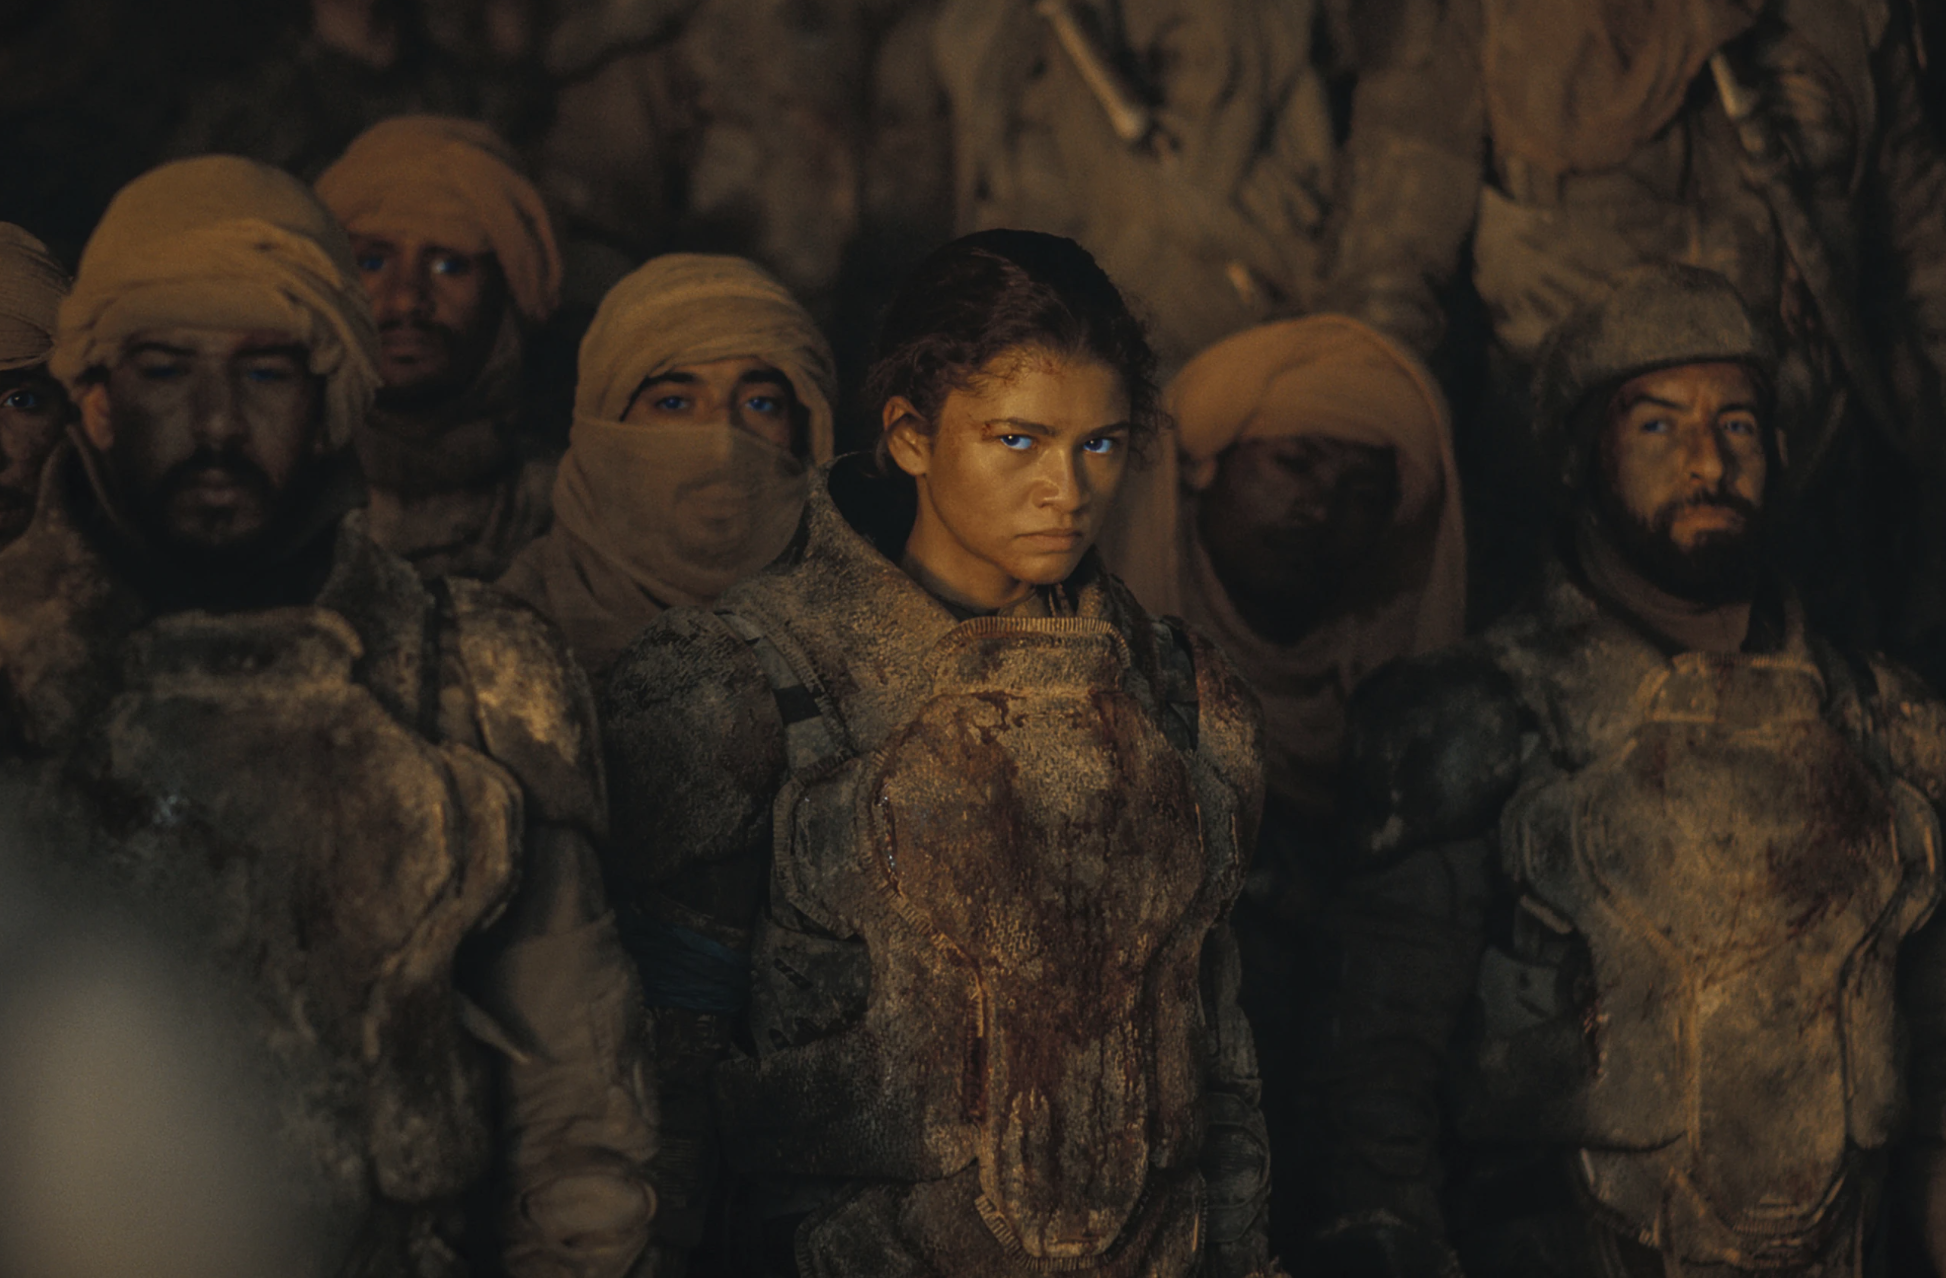 A woman glares into the distance with thinly veiled anger. She is wearing dirty utilitarian clothes and is surrounded by men dressed similarly.